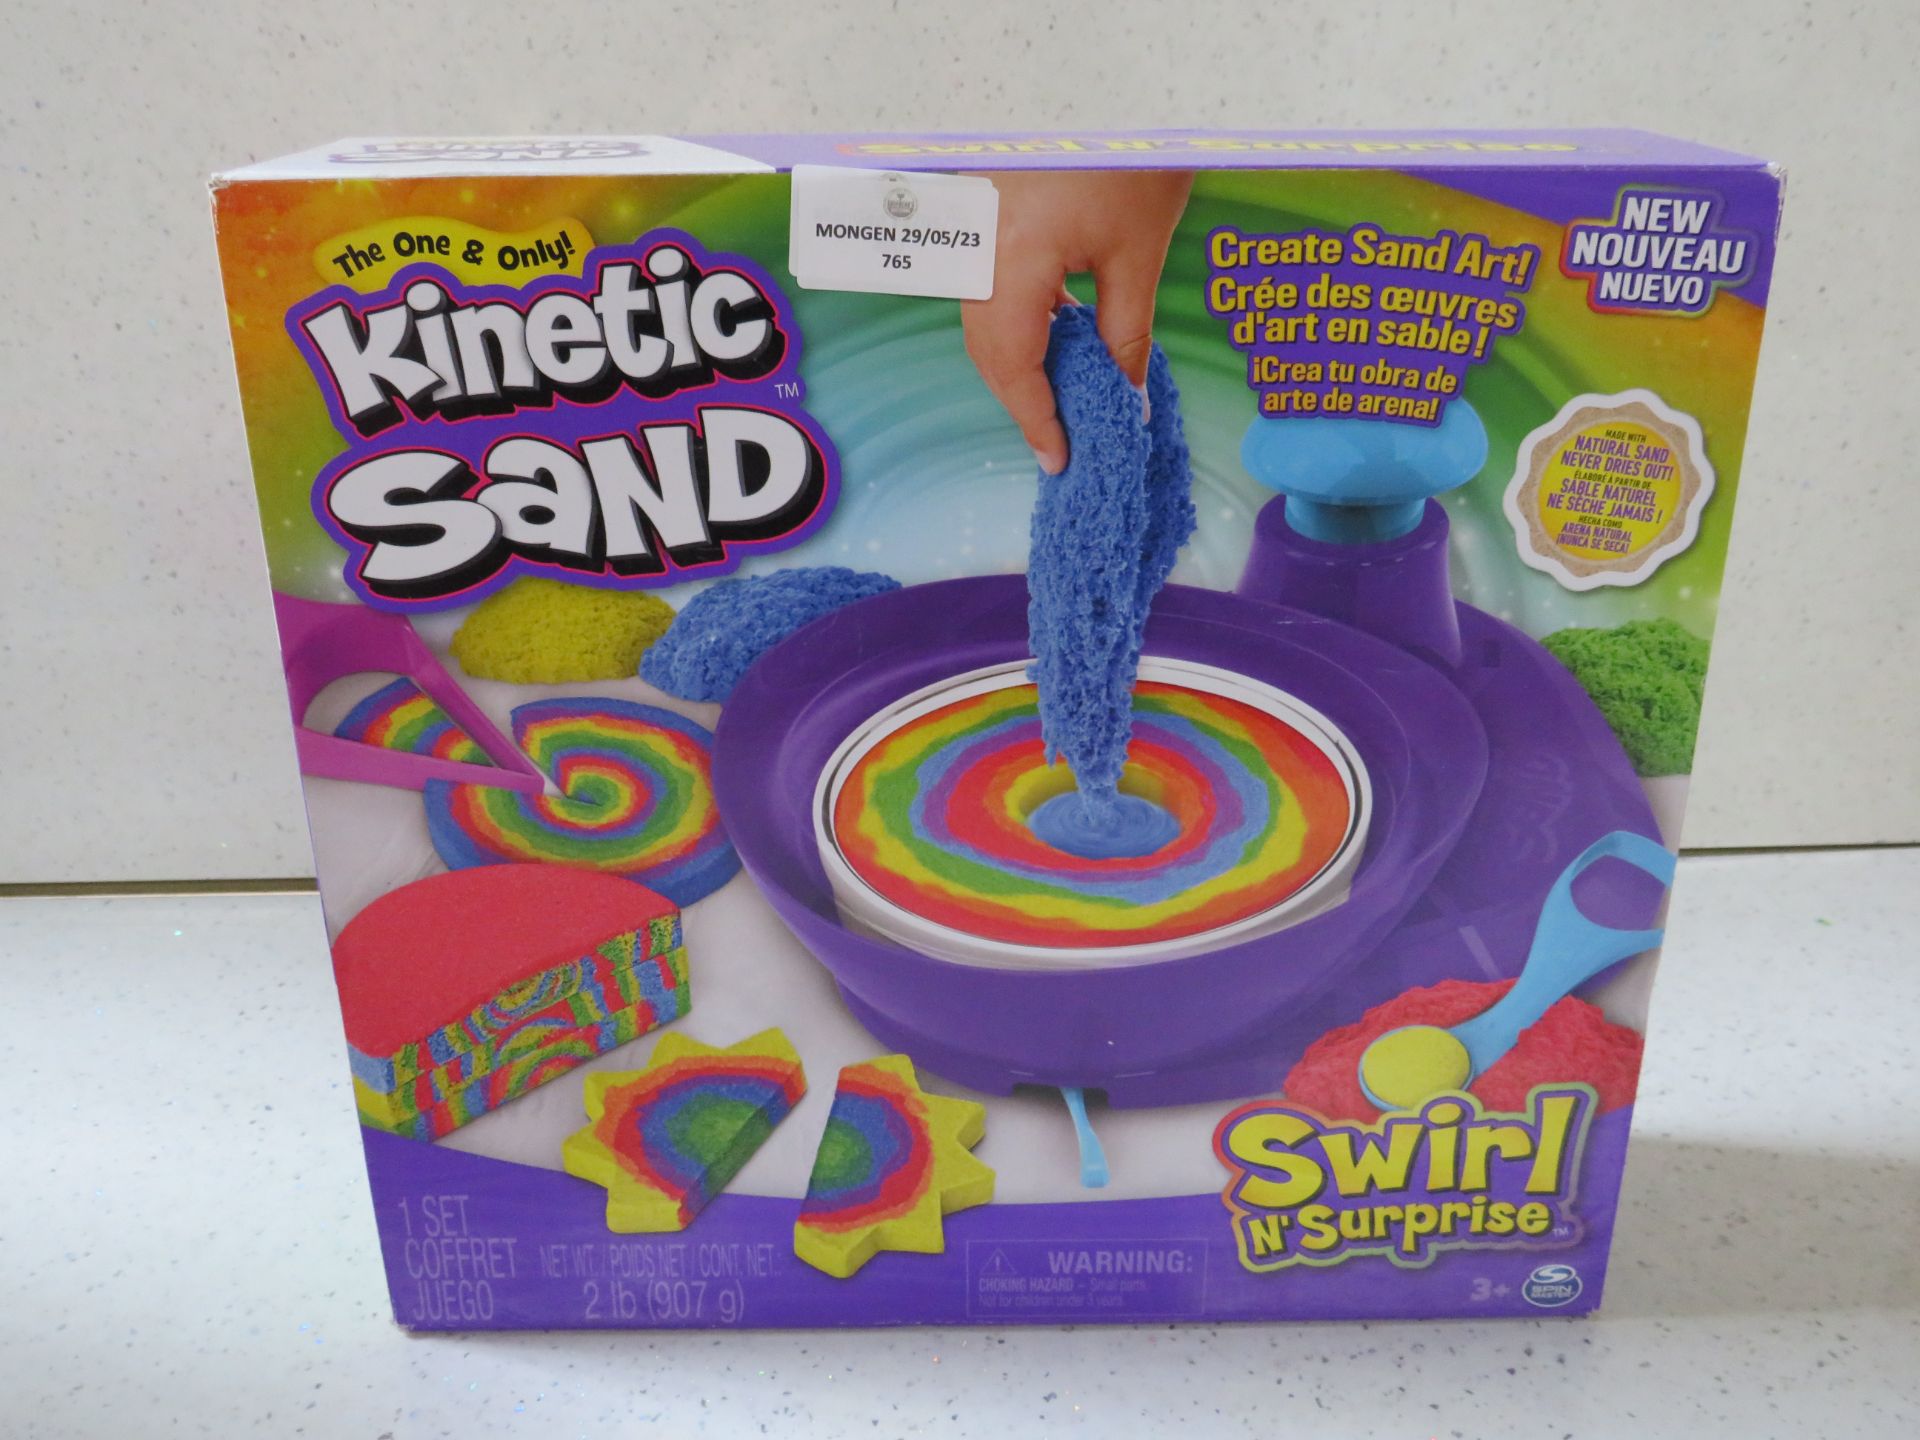 Kinetic Sand - Swirl 'n Surprice Set - Unchecked & Boxed.